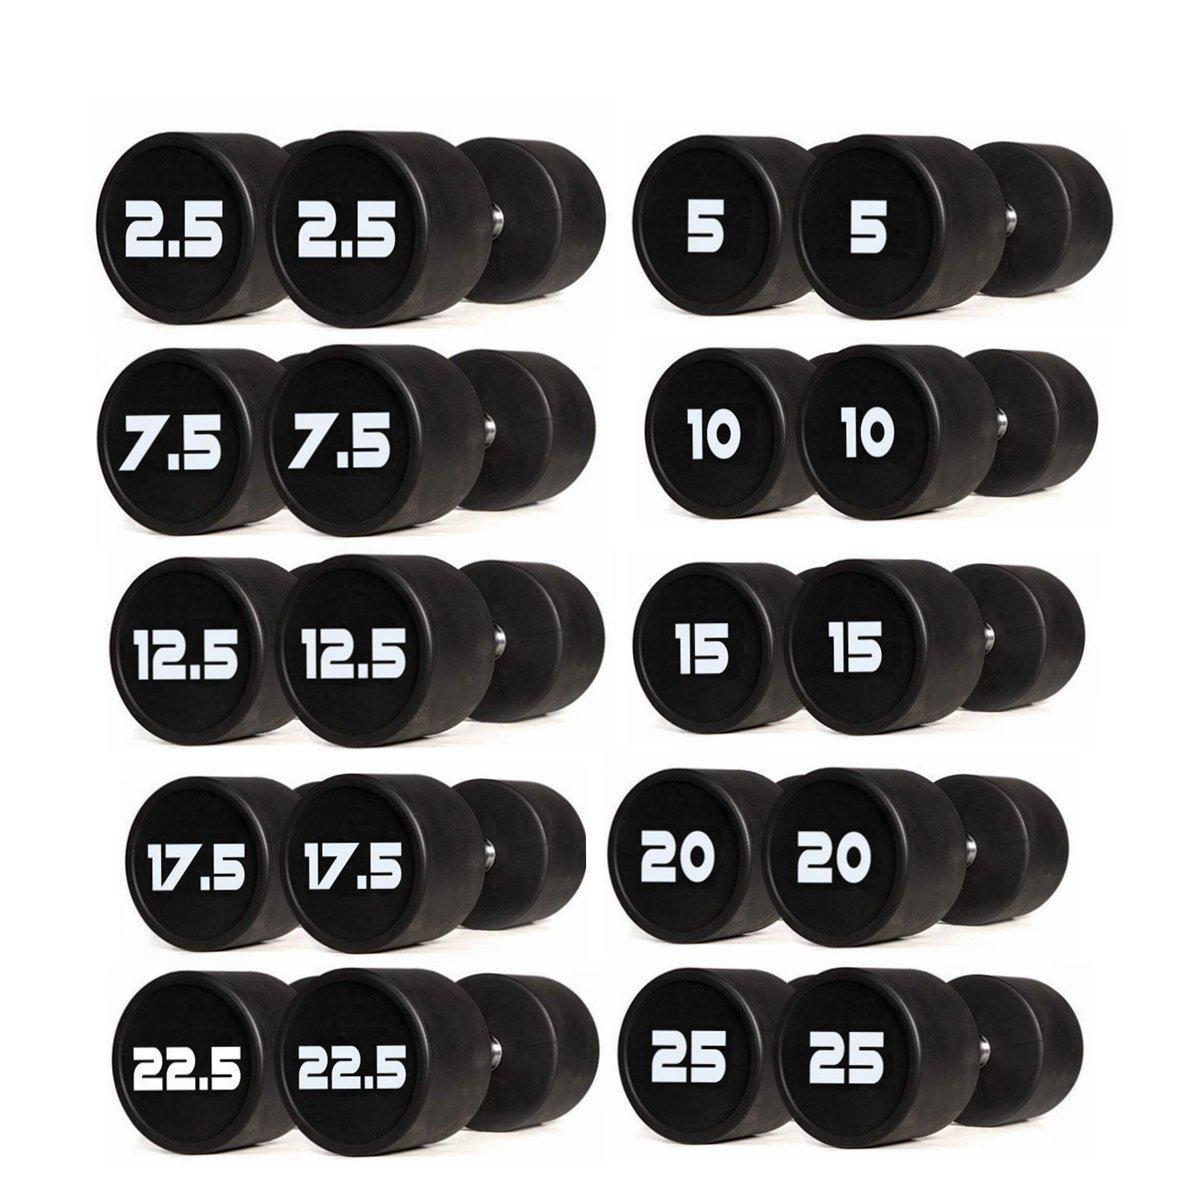 Prostyle Rubber Fixed Dumbbell Set  2.5kg to 25kg - 10 Pairs -Prostyle PU Dumbbell Package-Gym Direct